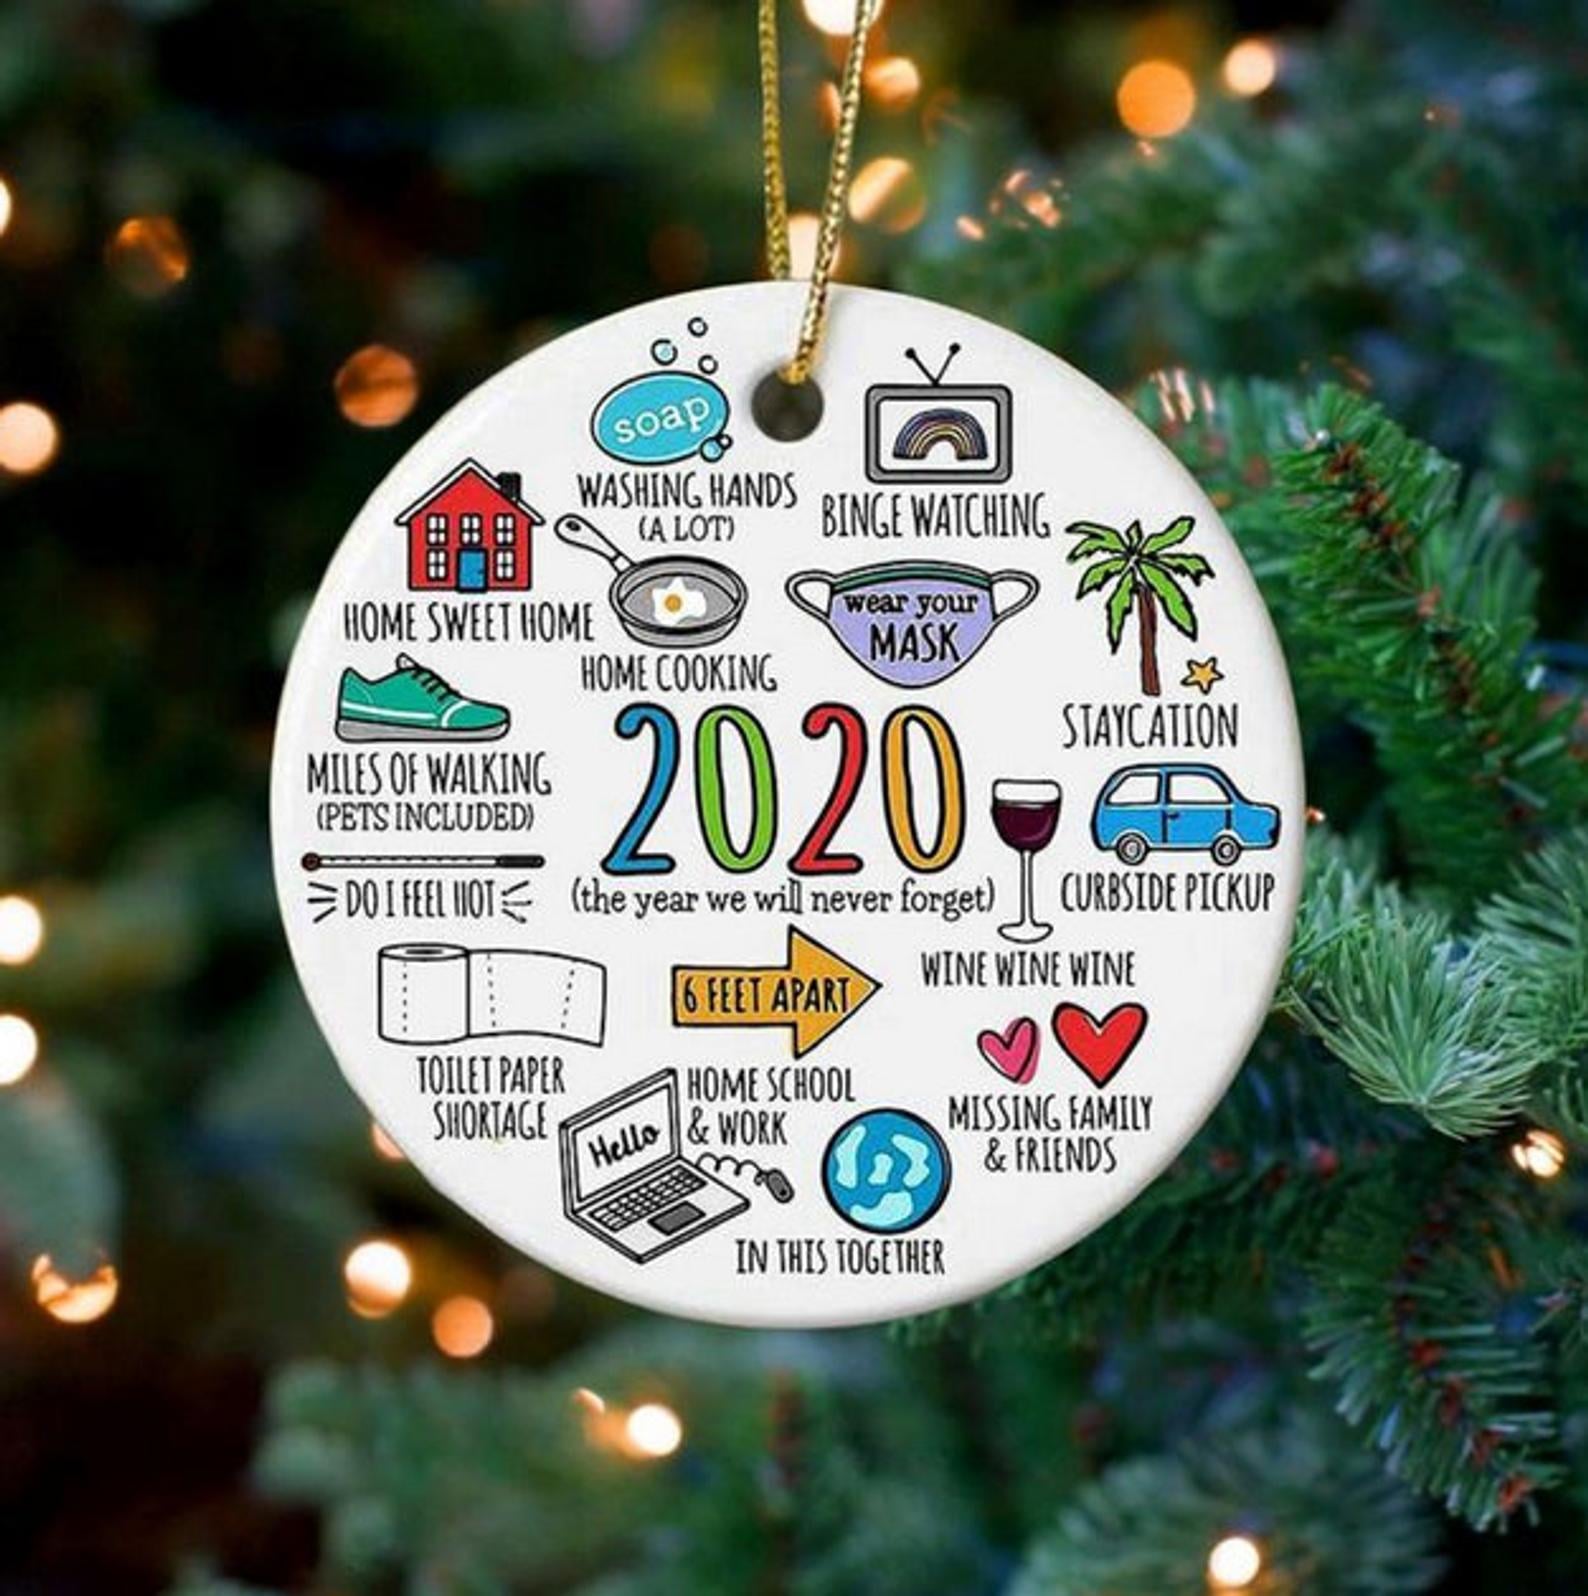 Hohomark We Survived Together Christmas Ornaments 2021 3 Santa Elk with Mask Quarantine Christmas Tree Ornaments Decorations Gifts to Remember 2021 Year